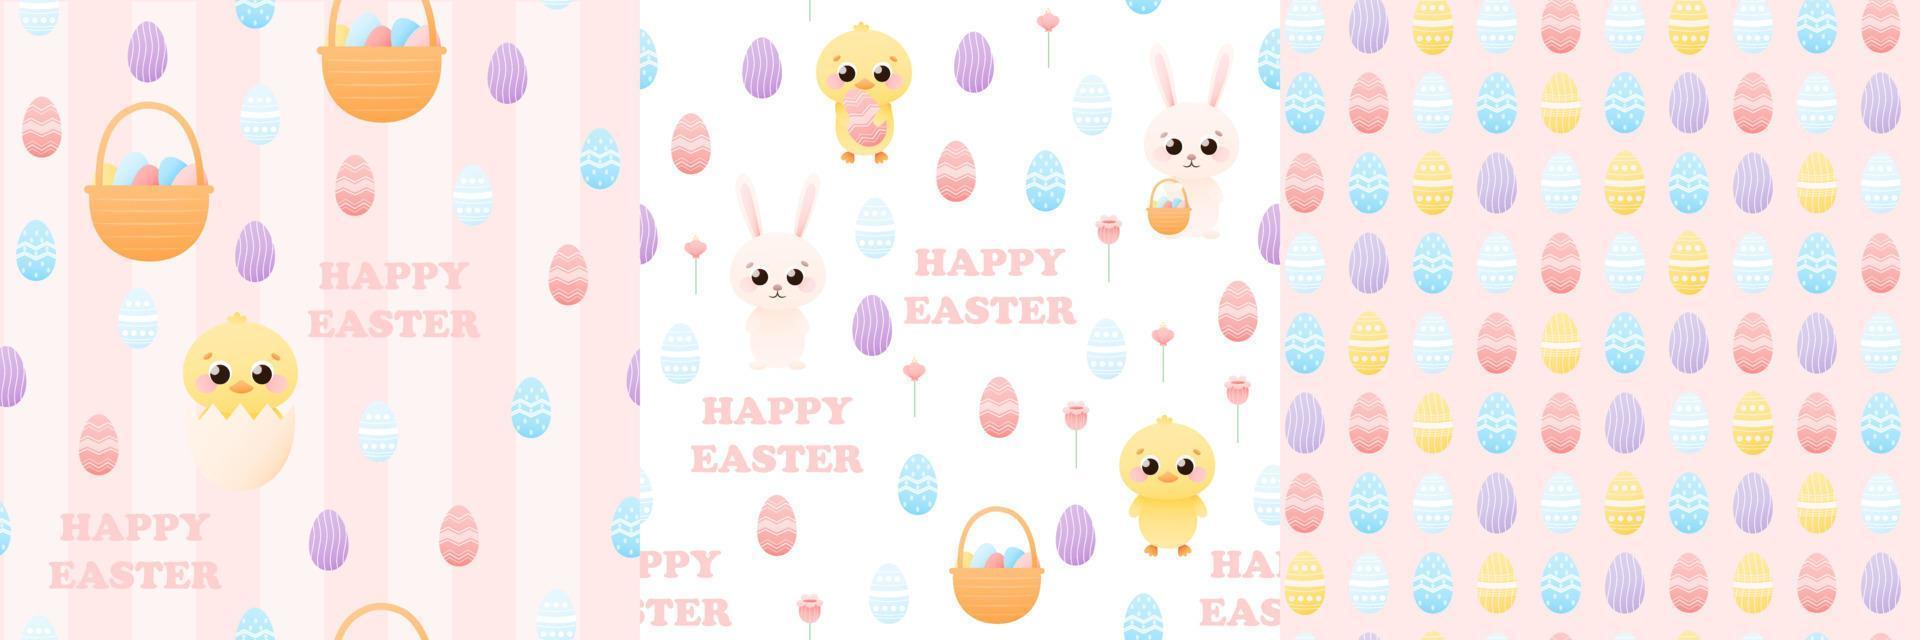 A collection of Easter-themed patterns - Easter